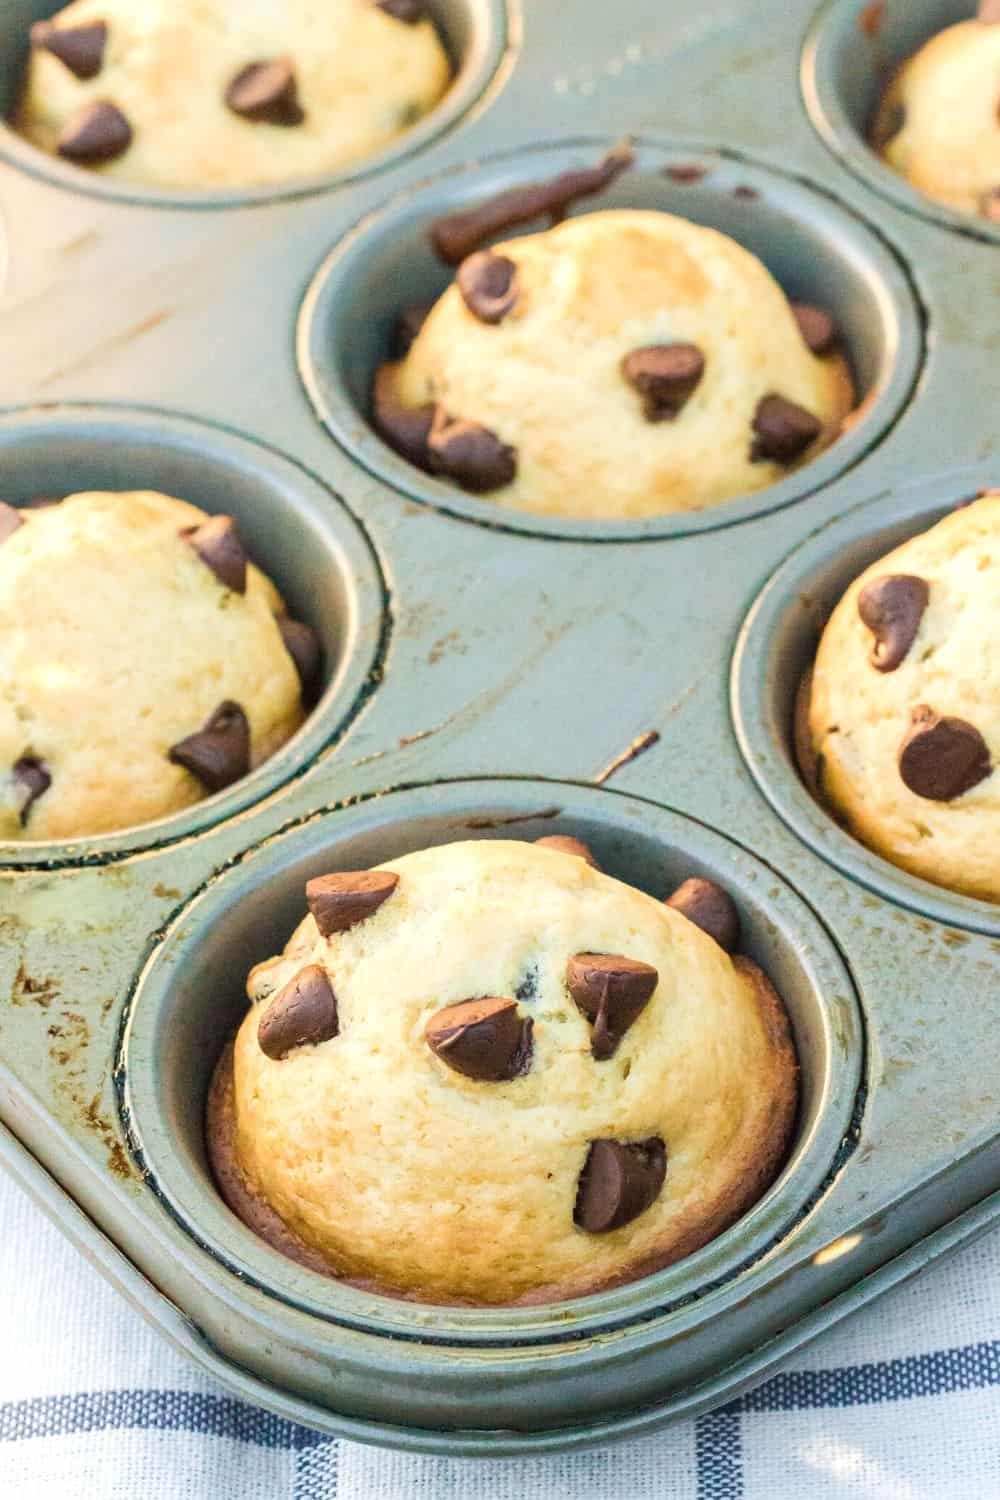 freshly baked chocolate chip Bisquick muffins still in the muffin pan